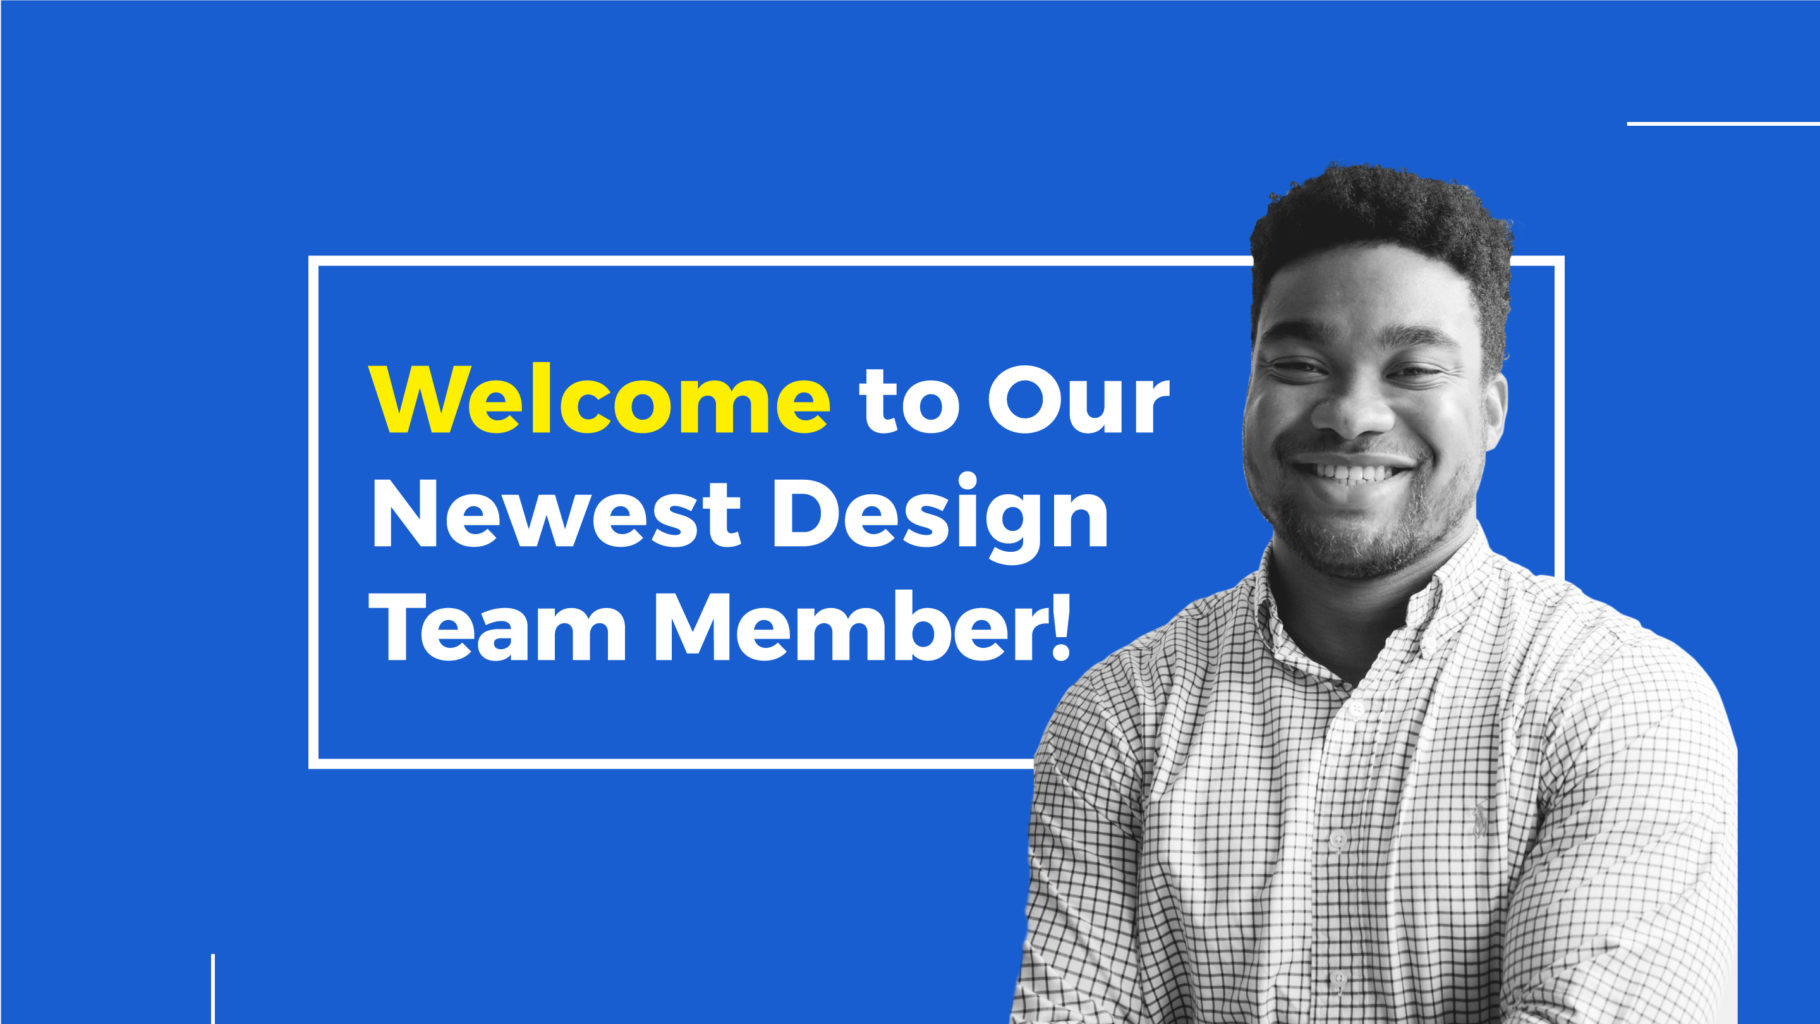 Welcome to our Newest Design Team Member – Tim Hawkins